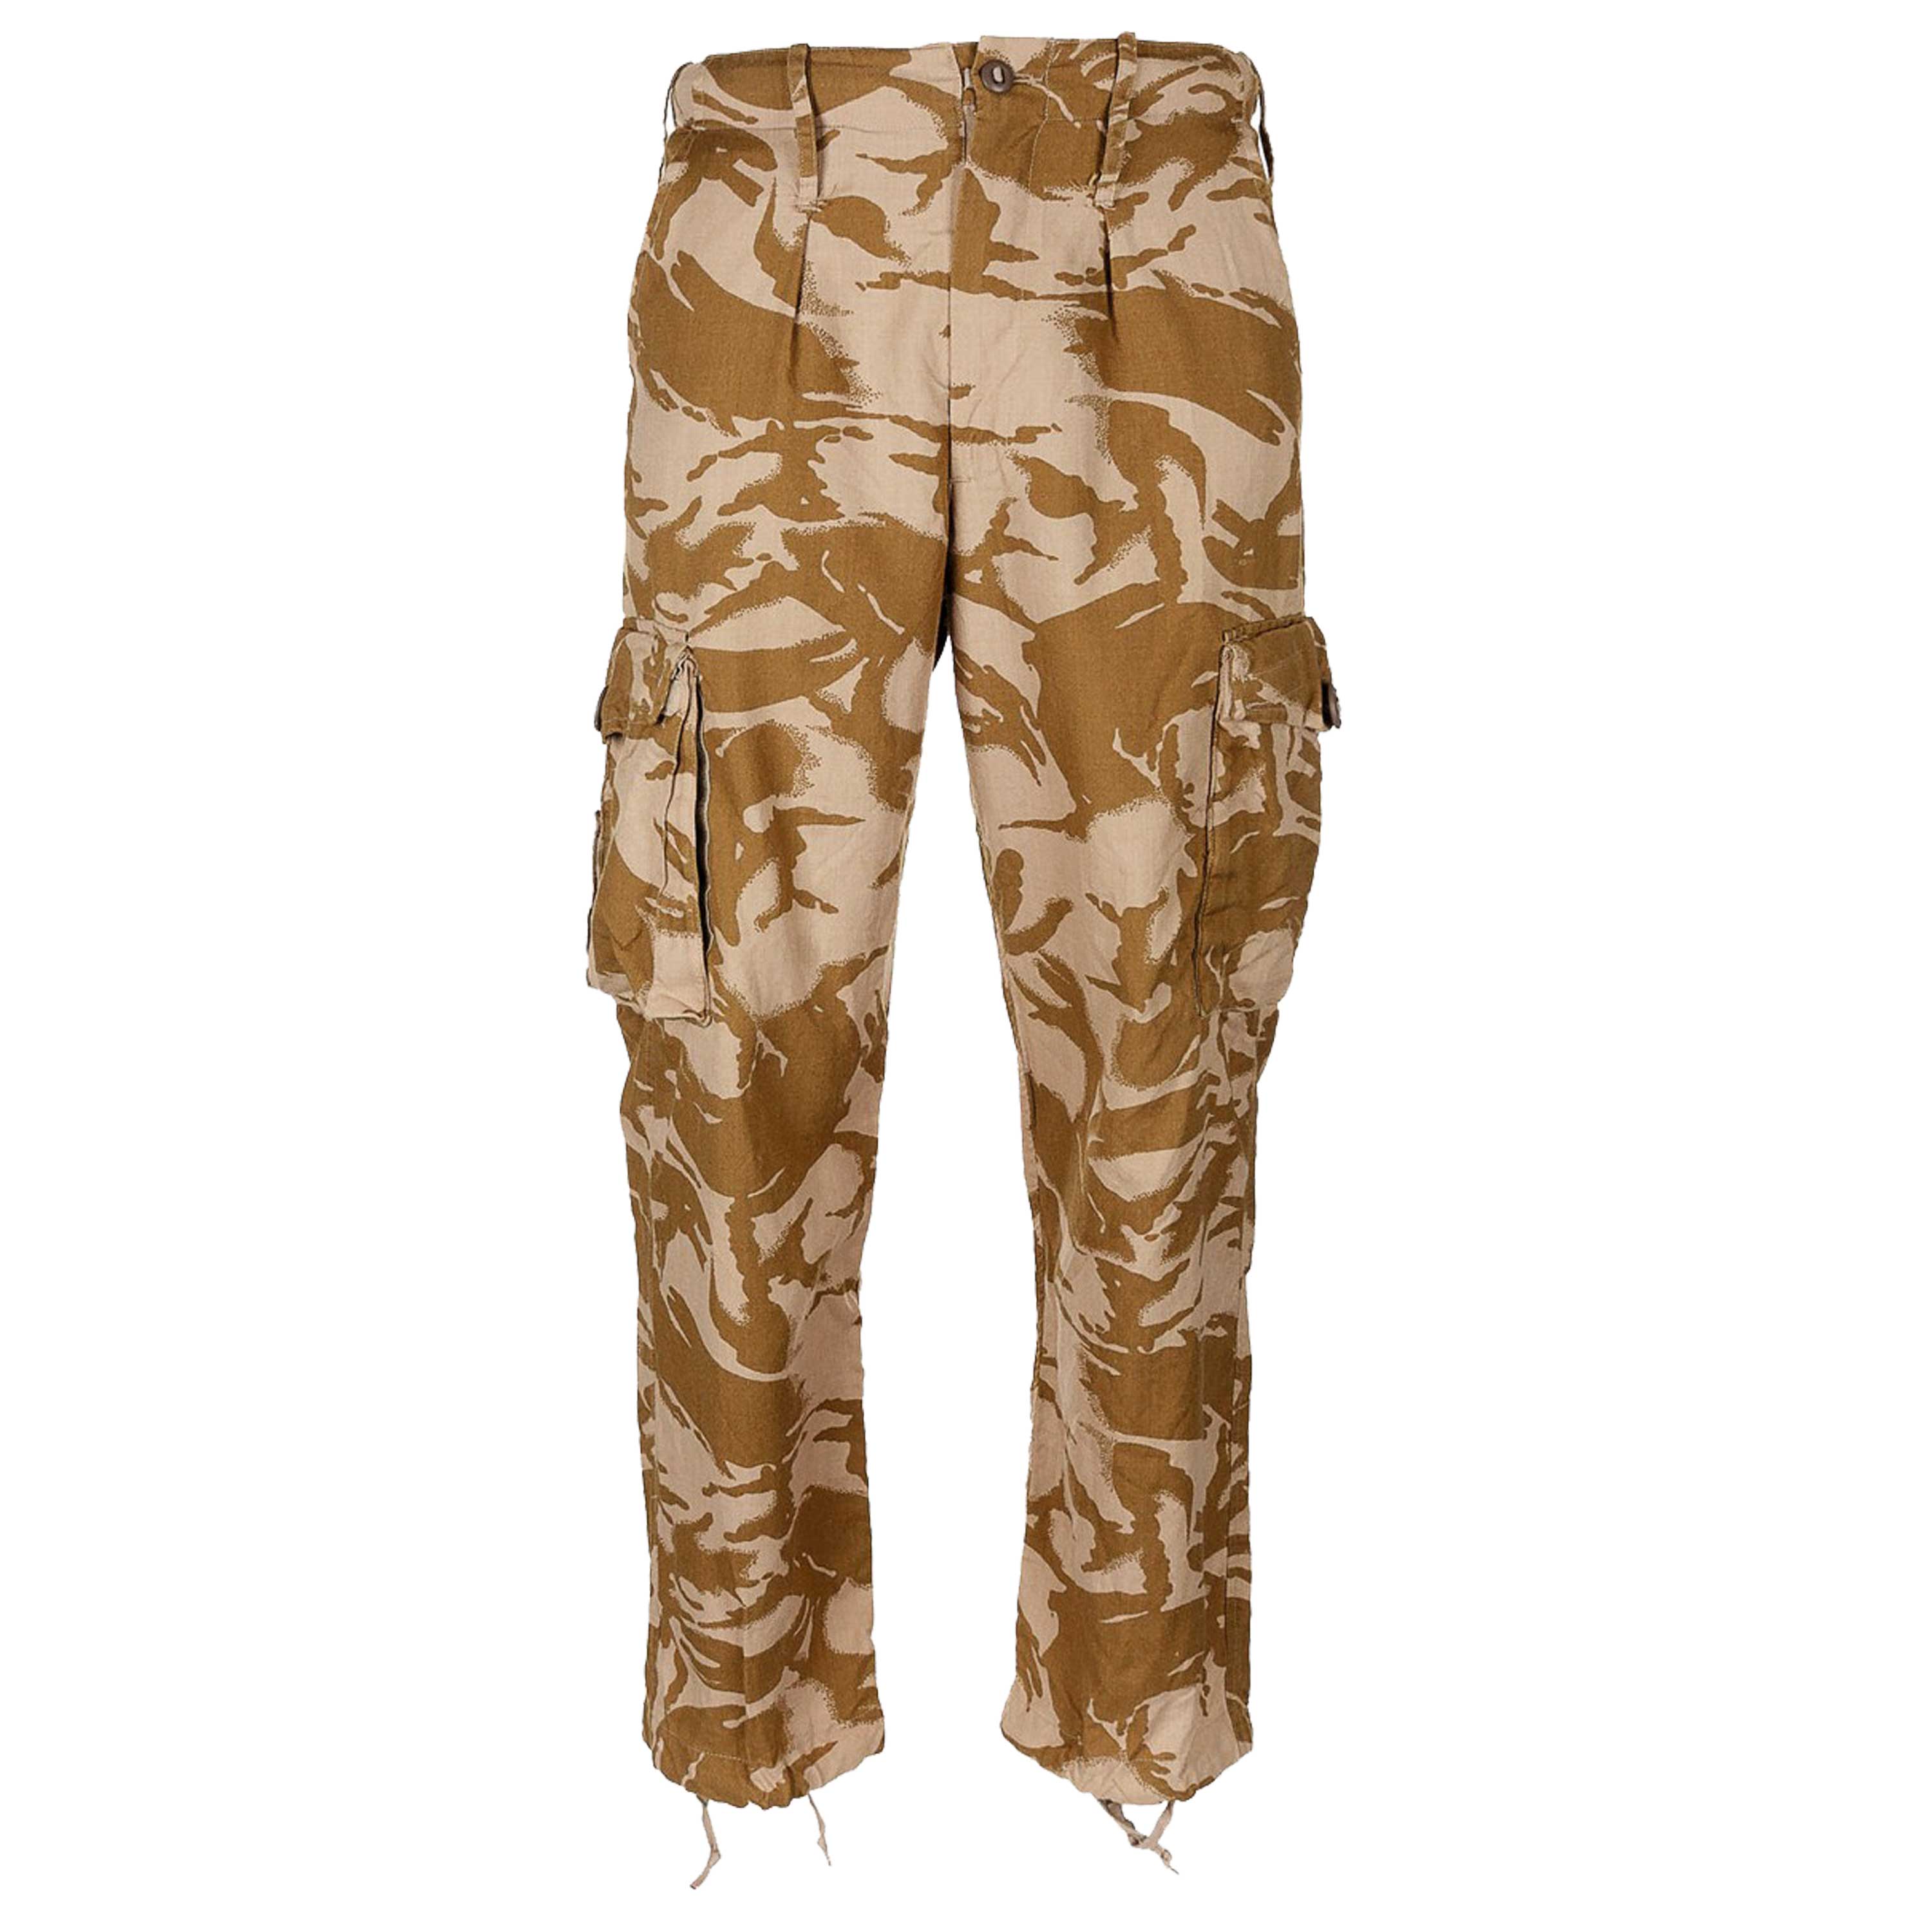 Purchase the Used British Combat Lightweight Pants DPM desert by